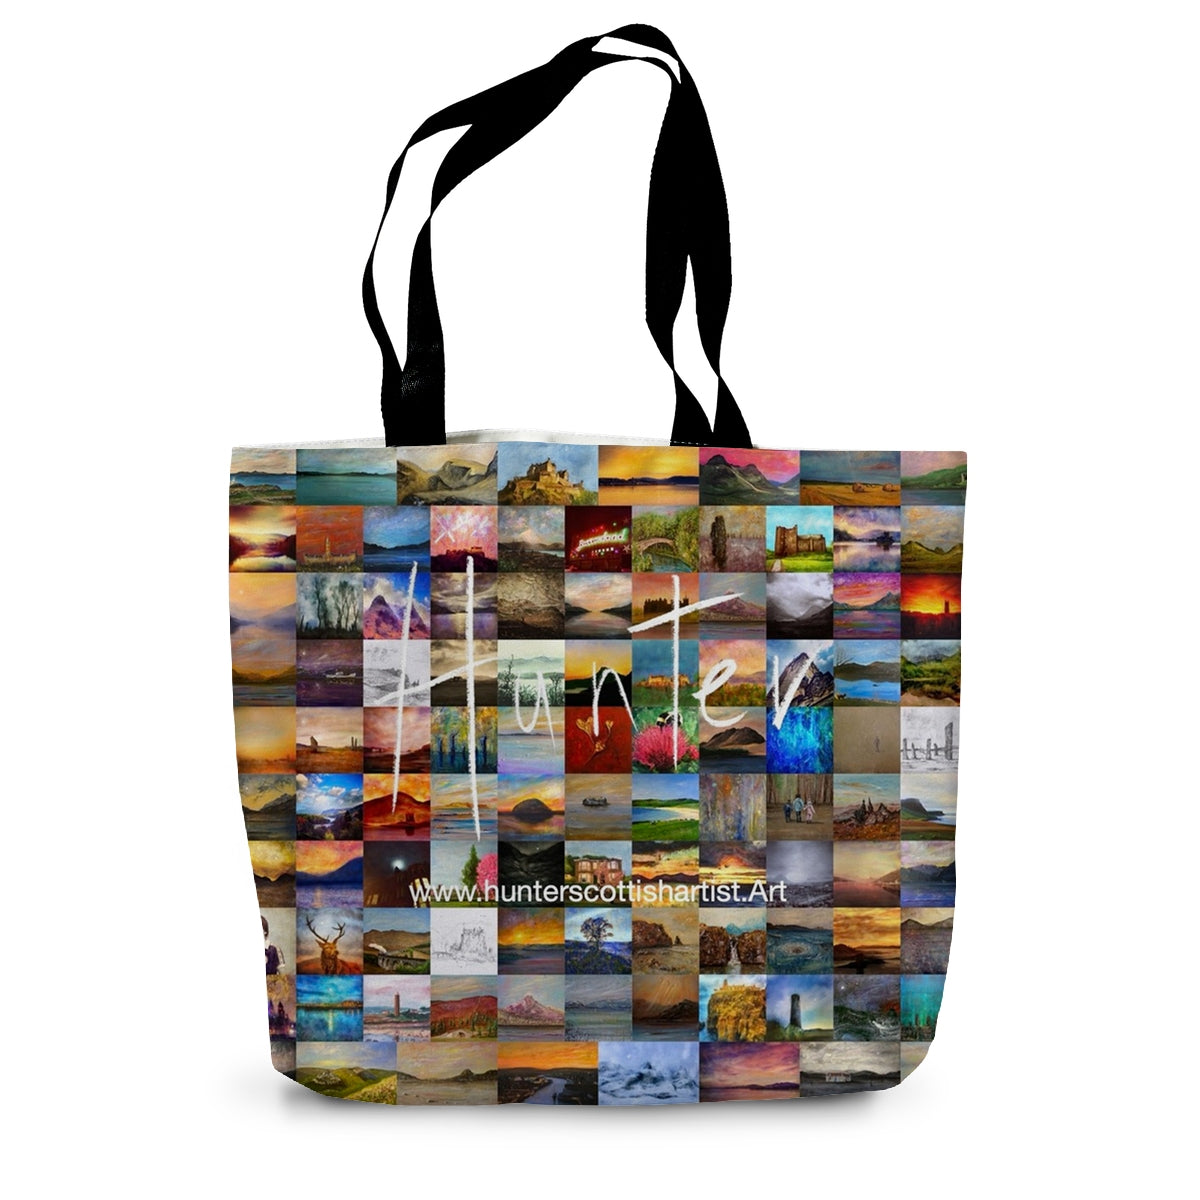 Looking From Dunoon Art Gifts Canvas Tote Bag-Bags-River Clyde Art Gallery-14"x18.5"-Paintings, Prints, Homeware, Art Gifts From Scotland By Scottish Artist Kevin Hunter